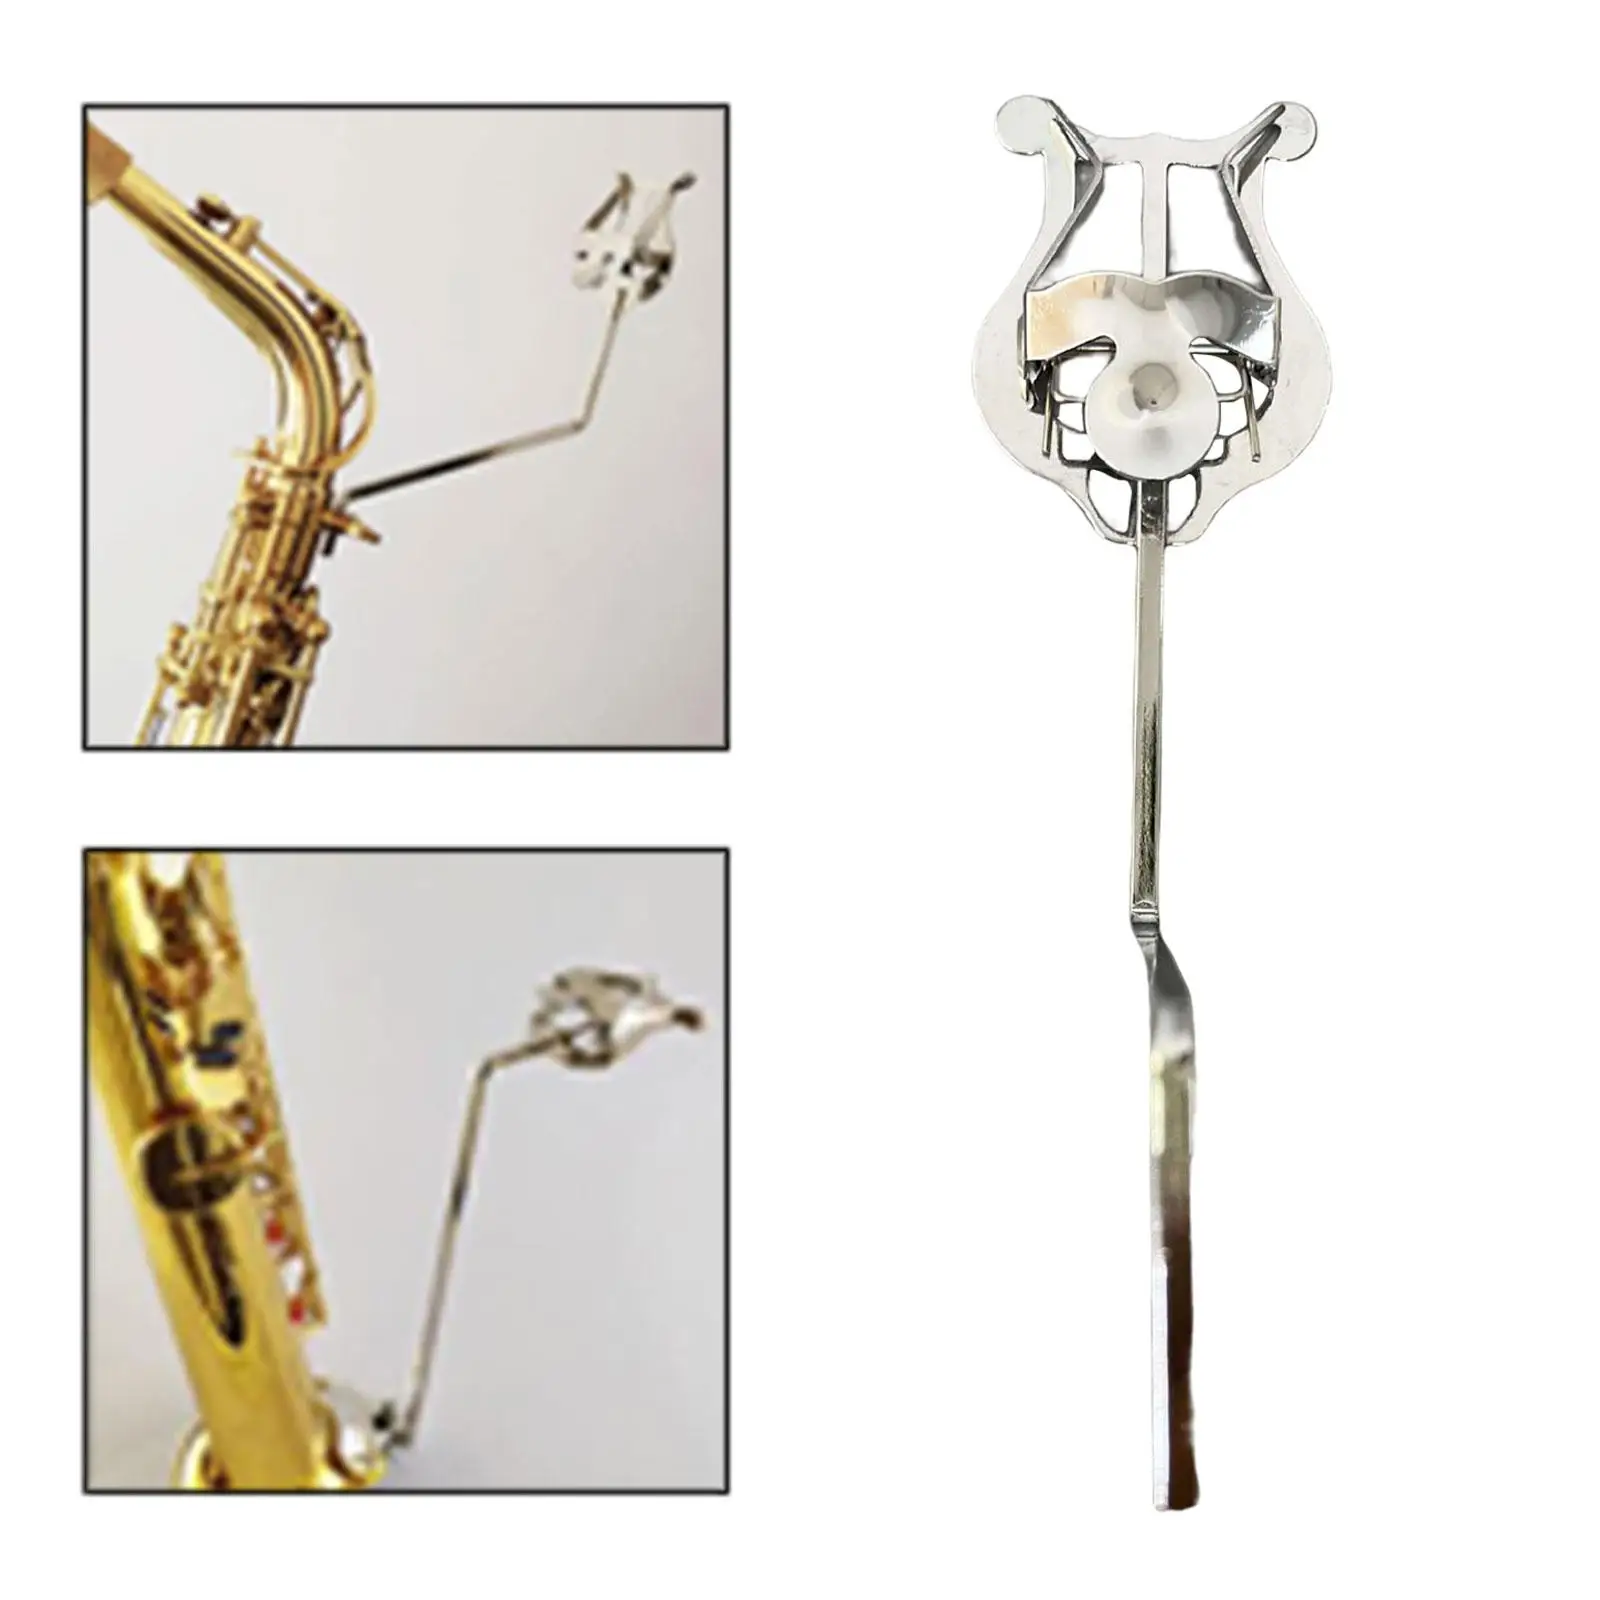 Portable Marching Lyre Clamp On Lyre Sheet Music Clip Trumpet Marching Clamp Holder for Tenor Instruments Sax Part Accessories